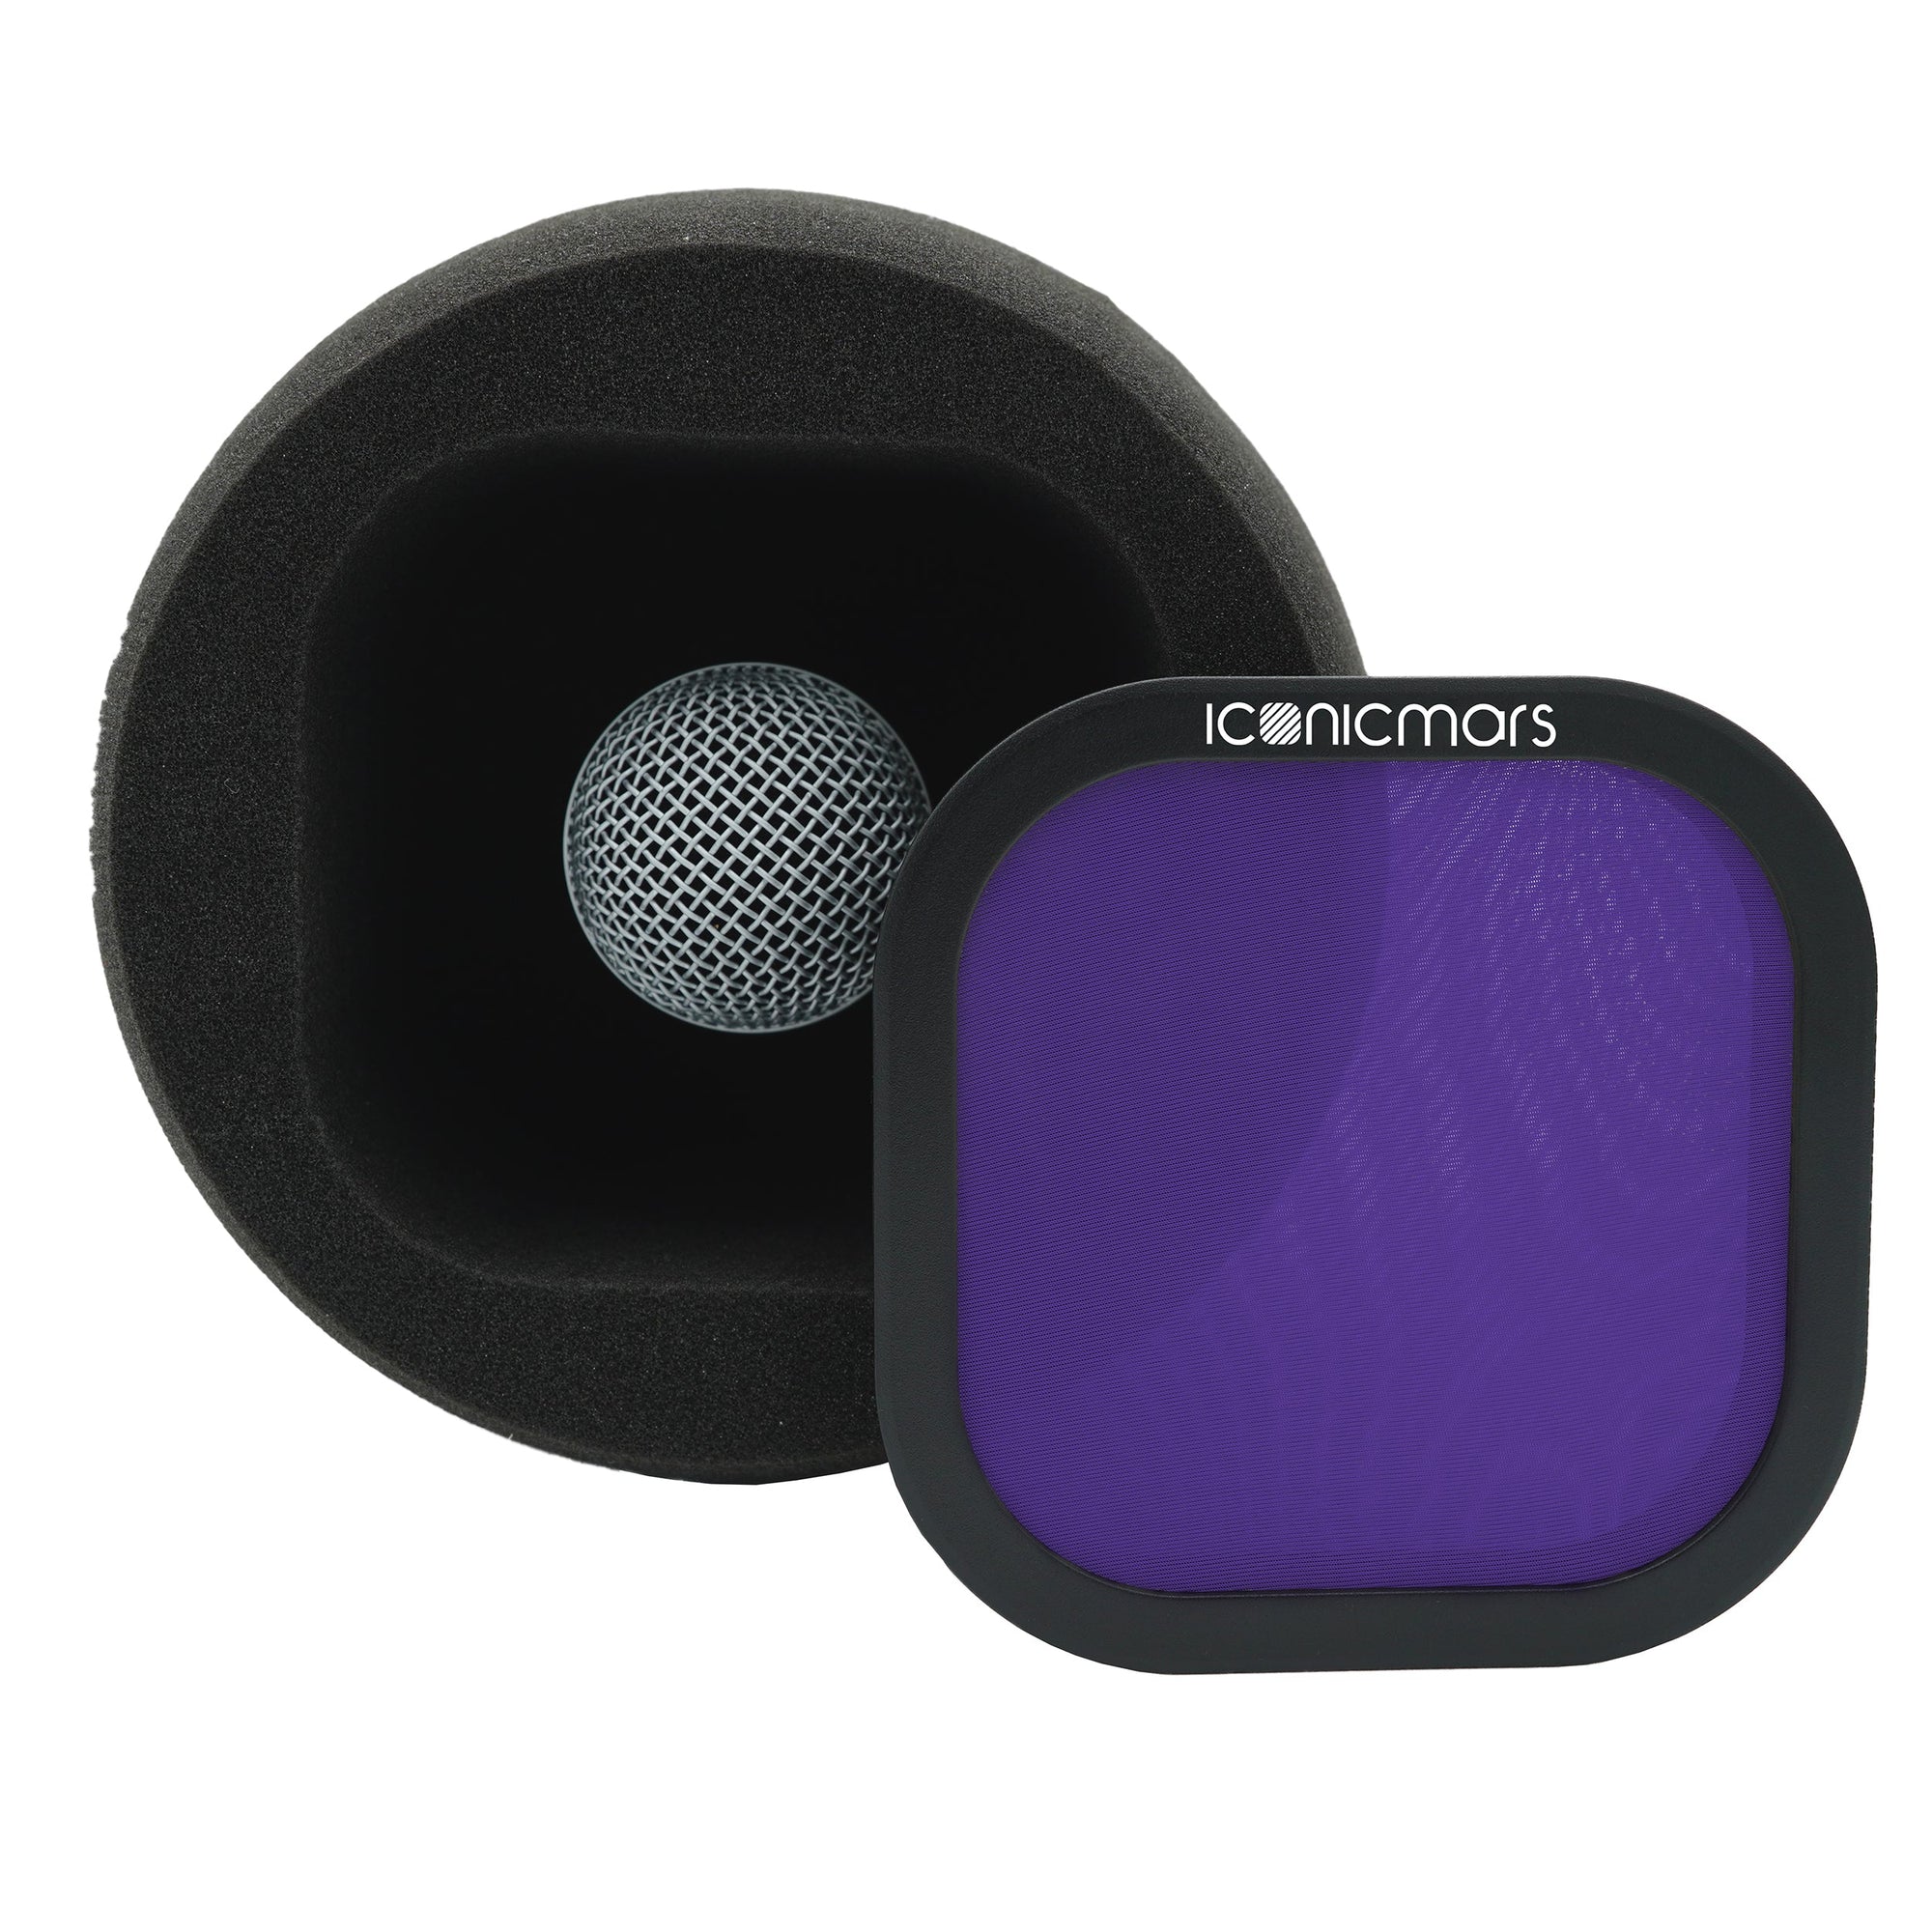 Comet X7A with dual layer mesh pop filter, filter is off and showing mic acoustic isolation chamber  -- Midnight Purple